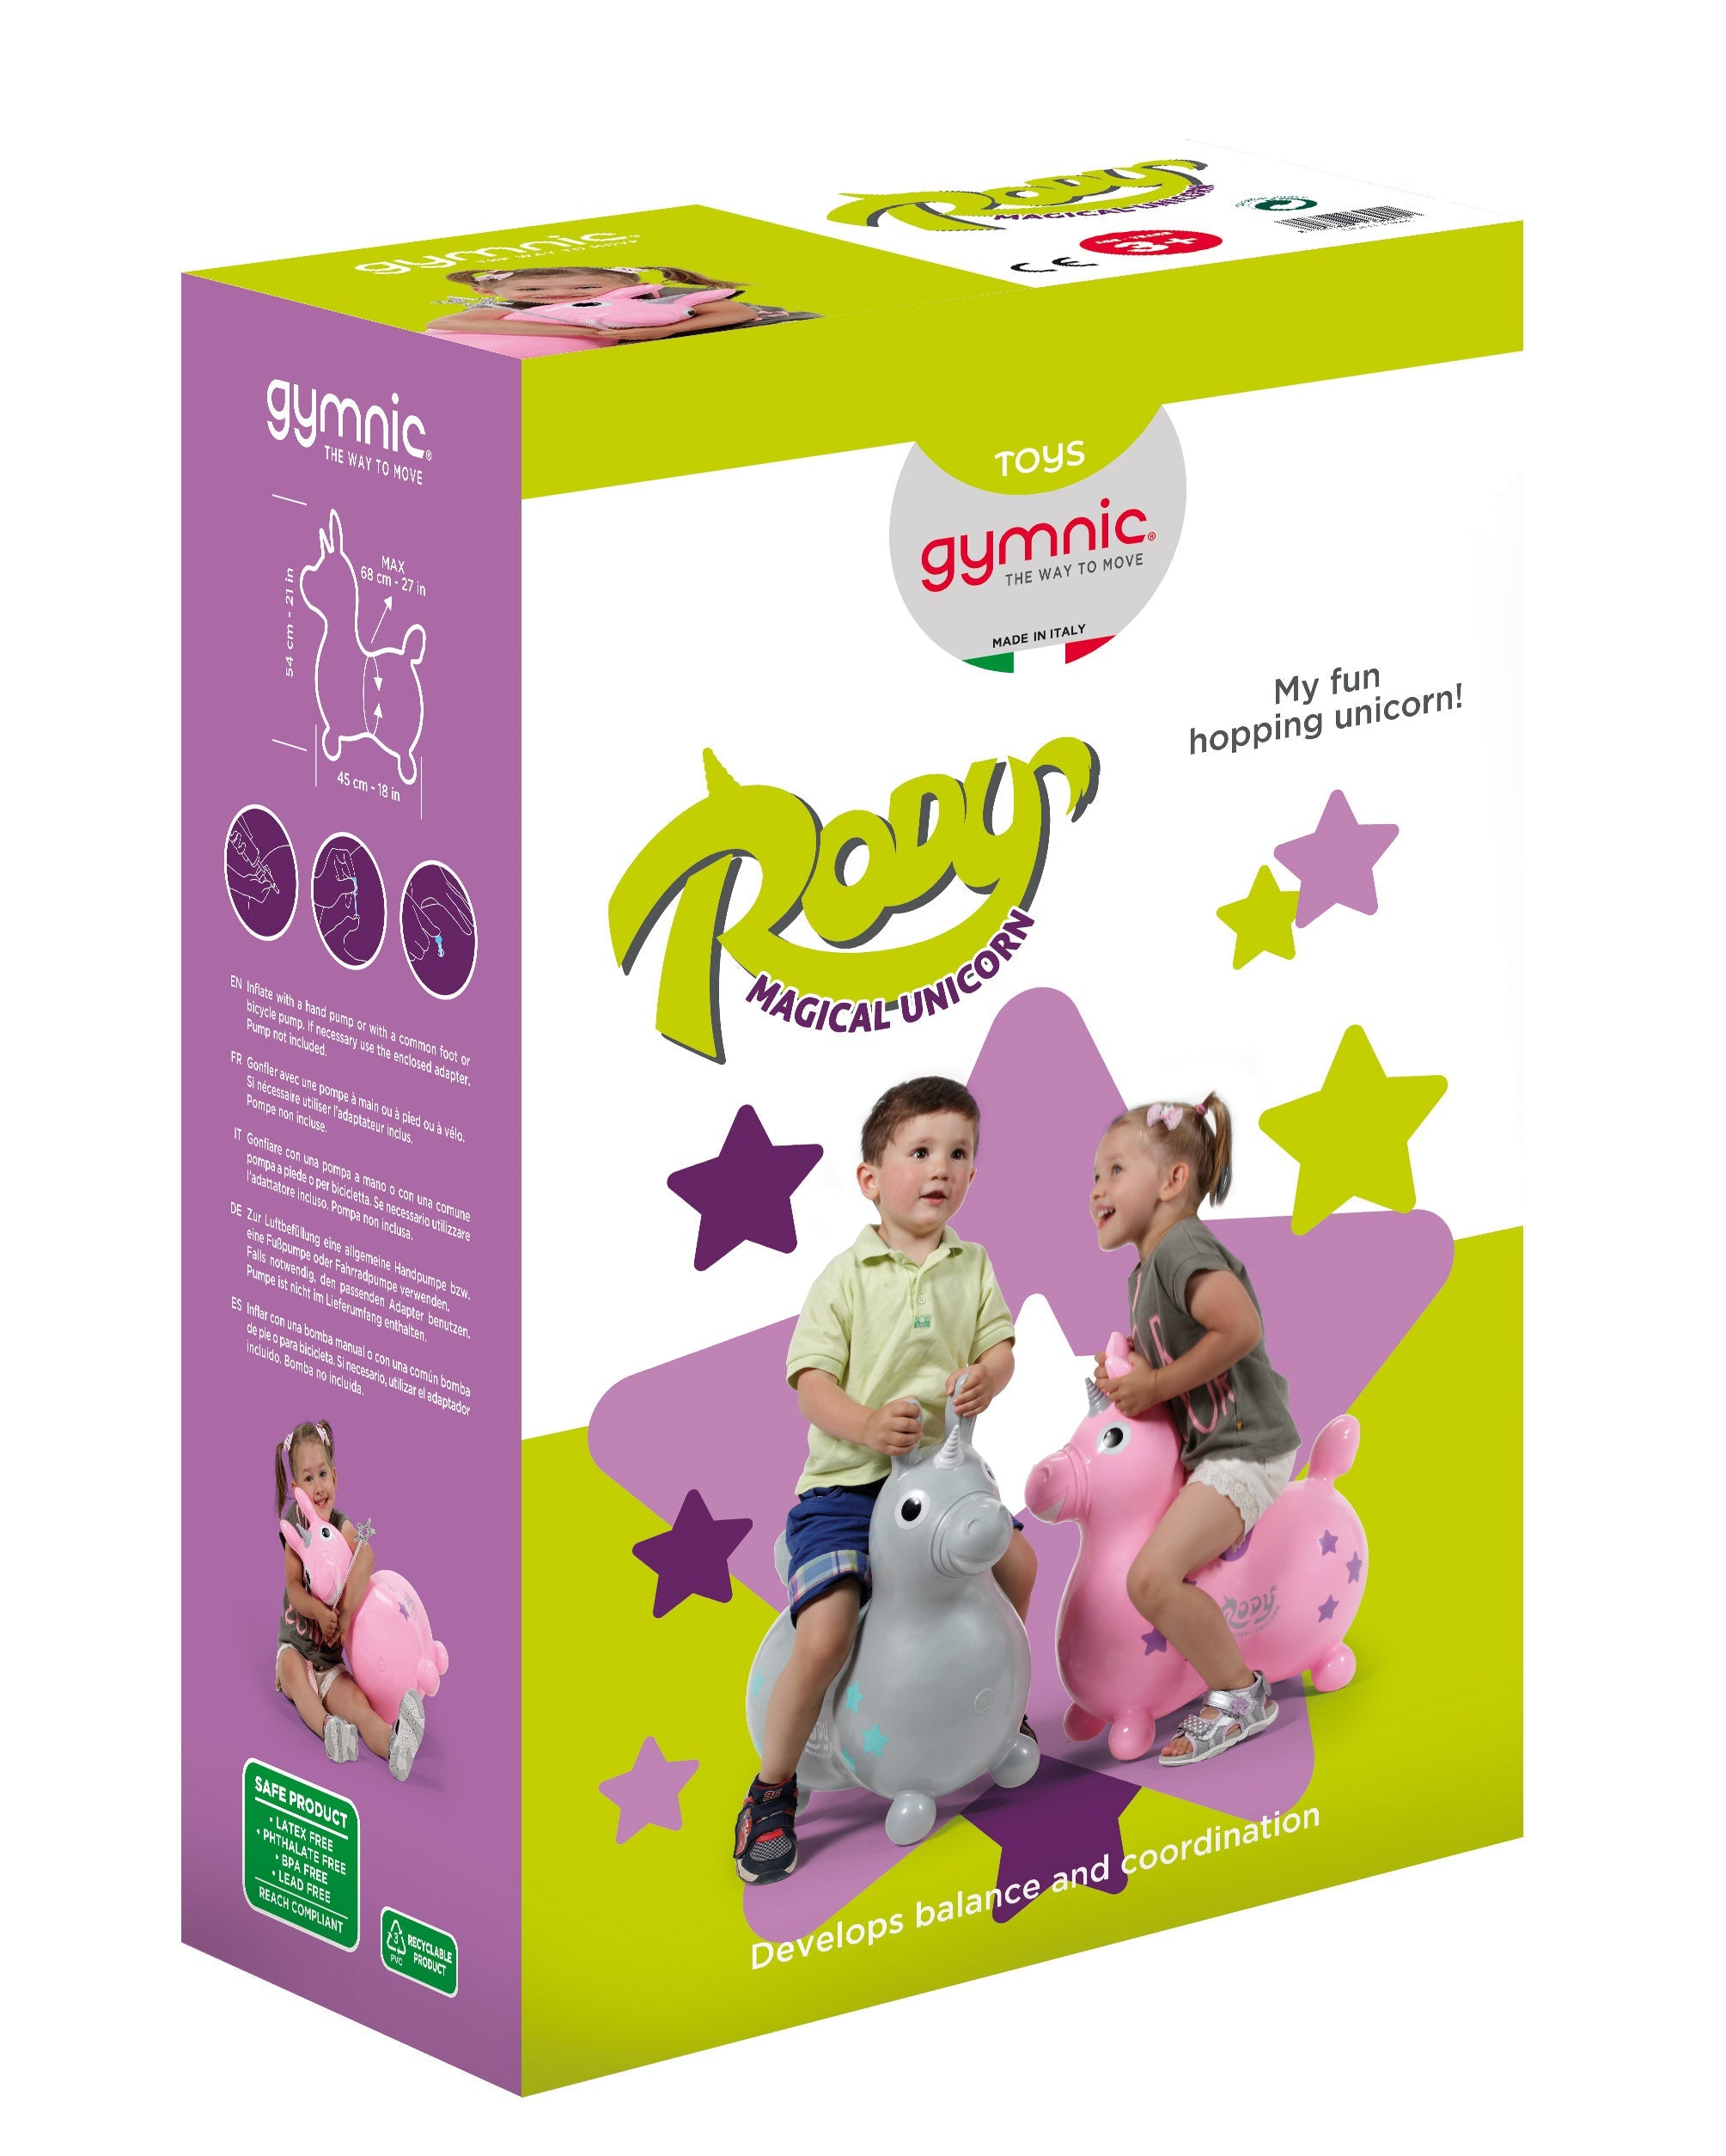 Rody Magical Unicorn Bounce Toy With Pump